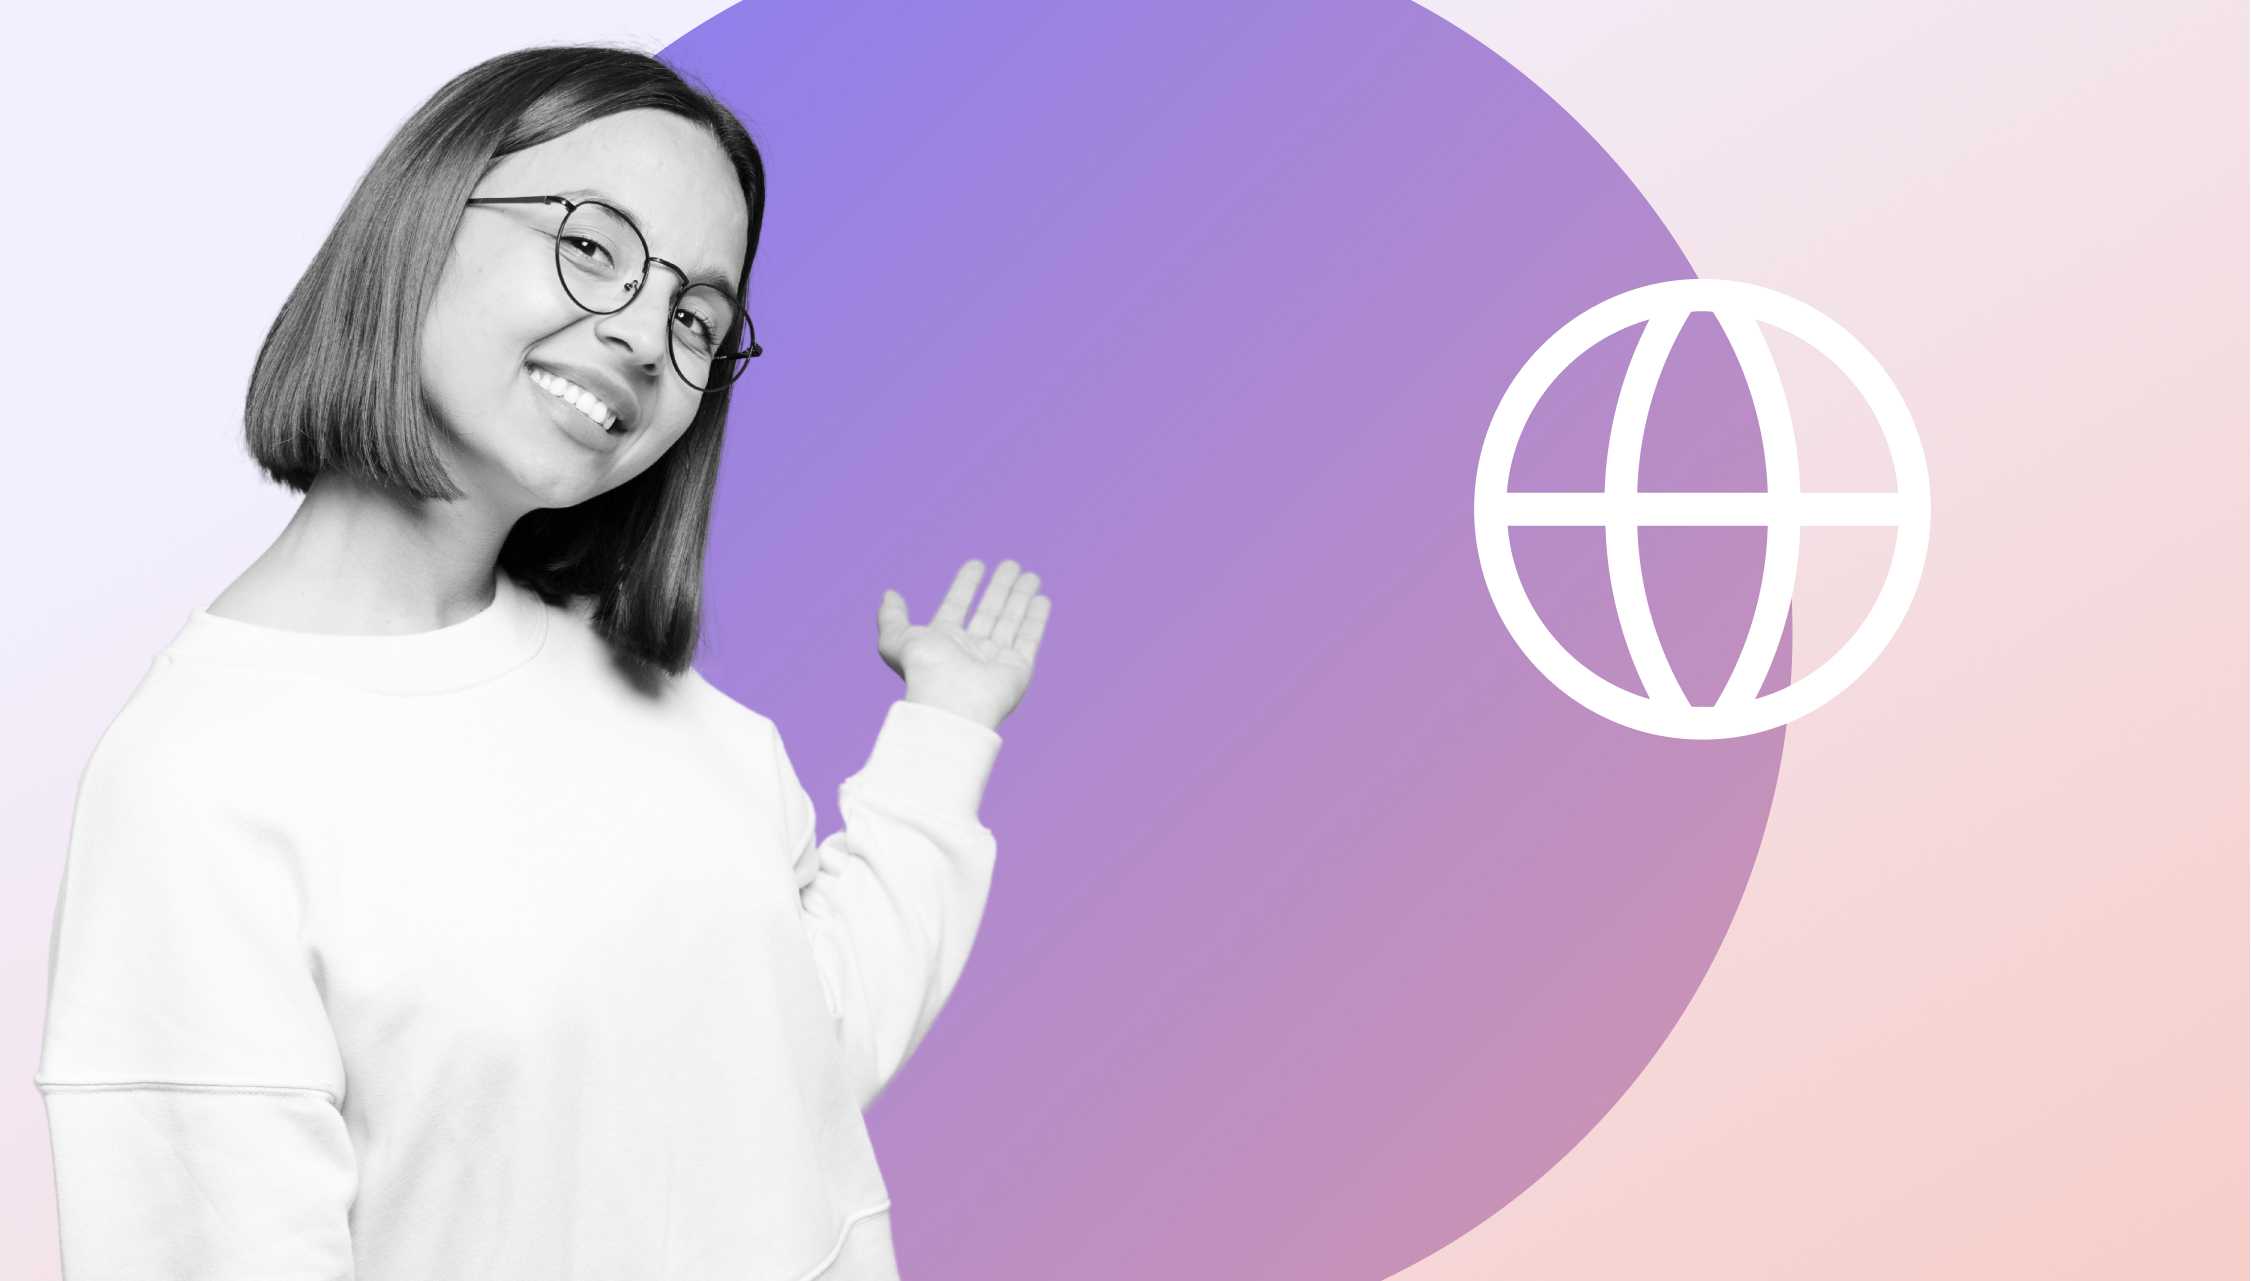 Woman with glasses in front of a purple circle. She points to a globe icon